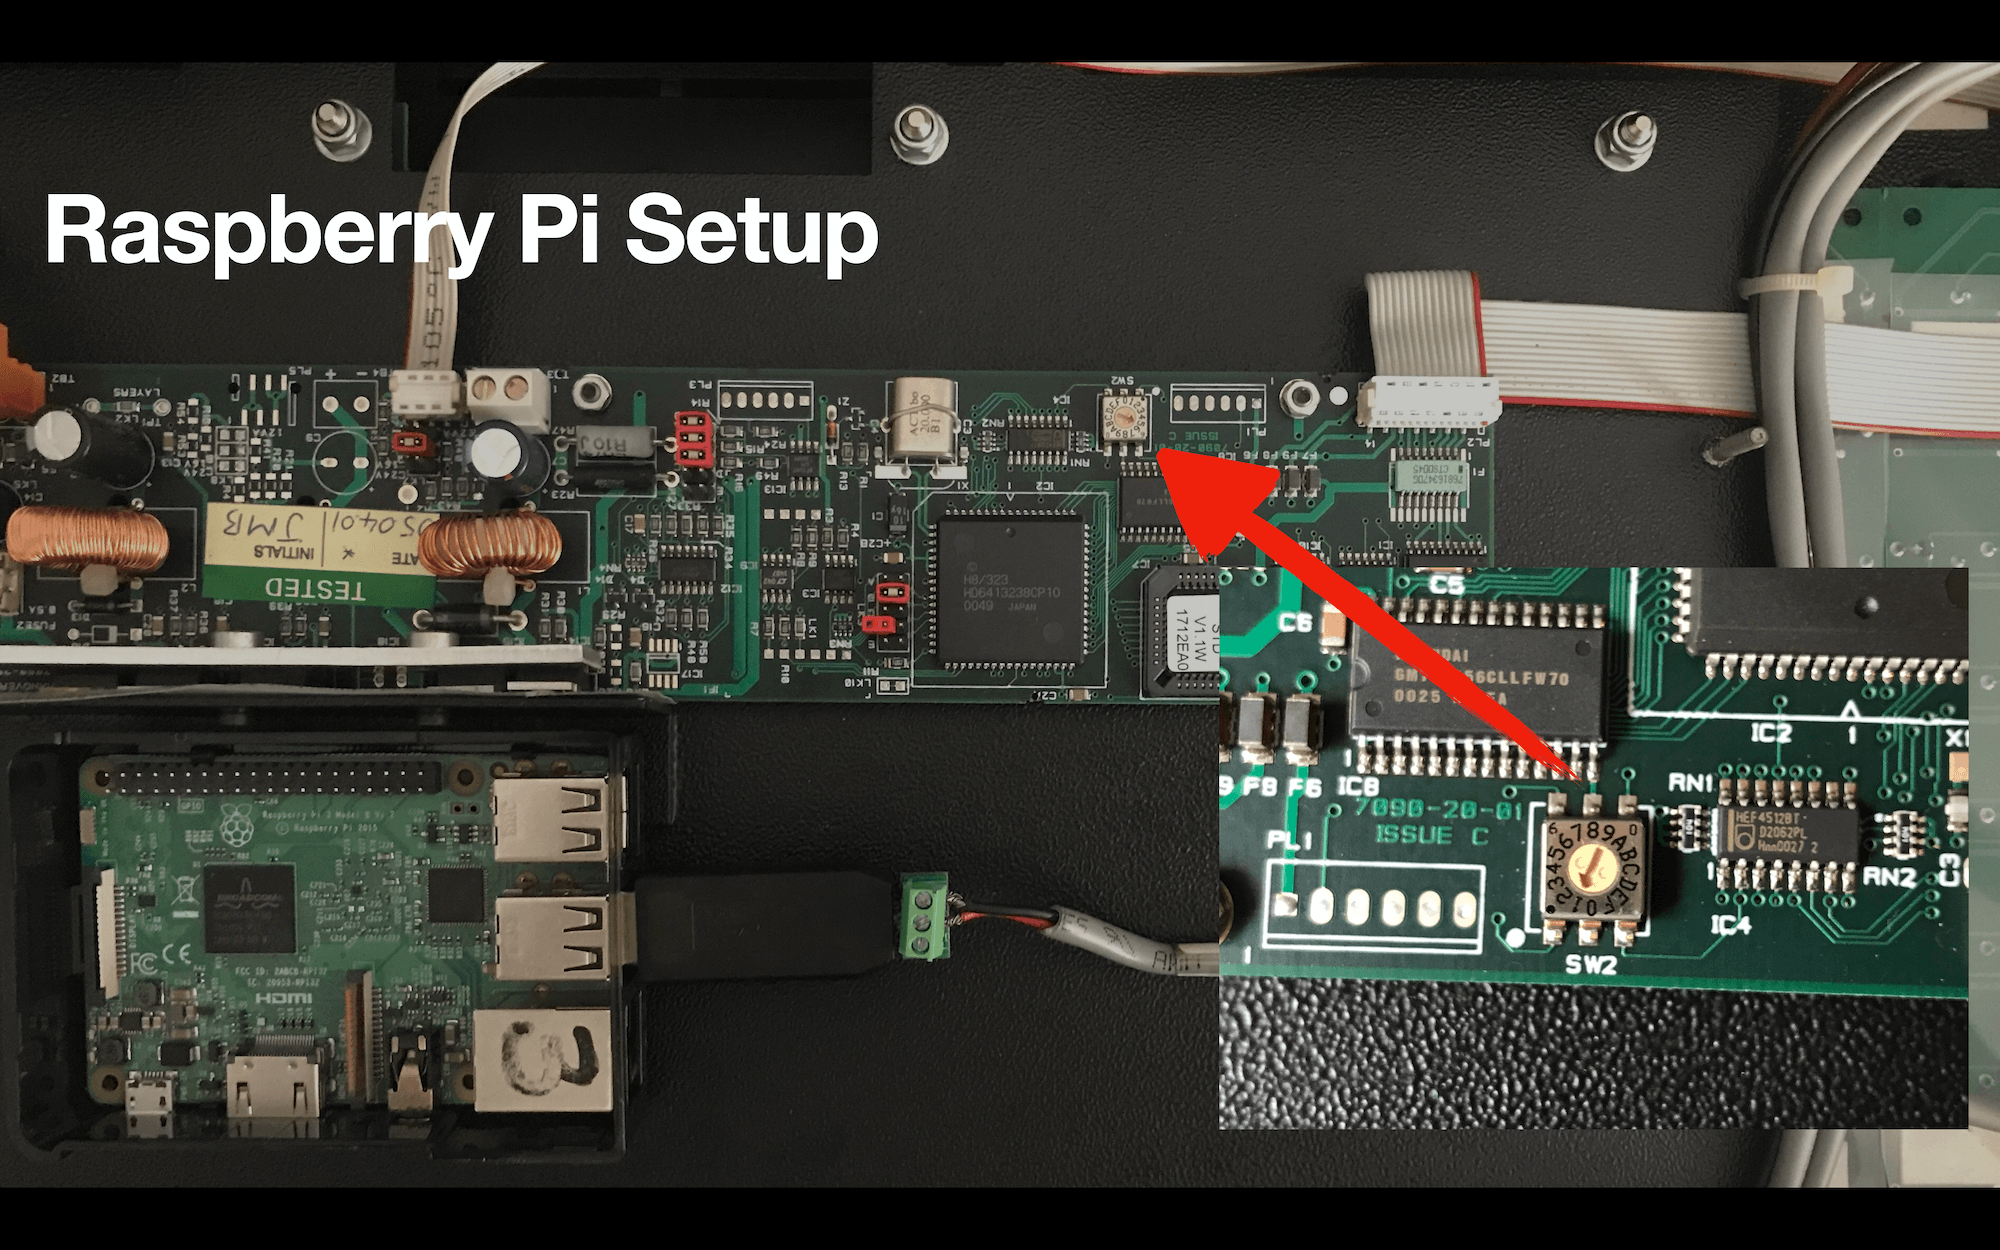 Inside the flip dot sign showing the Raspberry Pi and RS485 USB modem